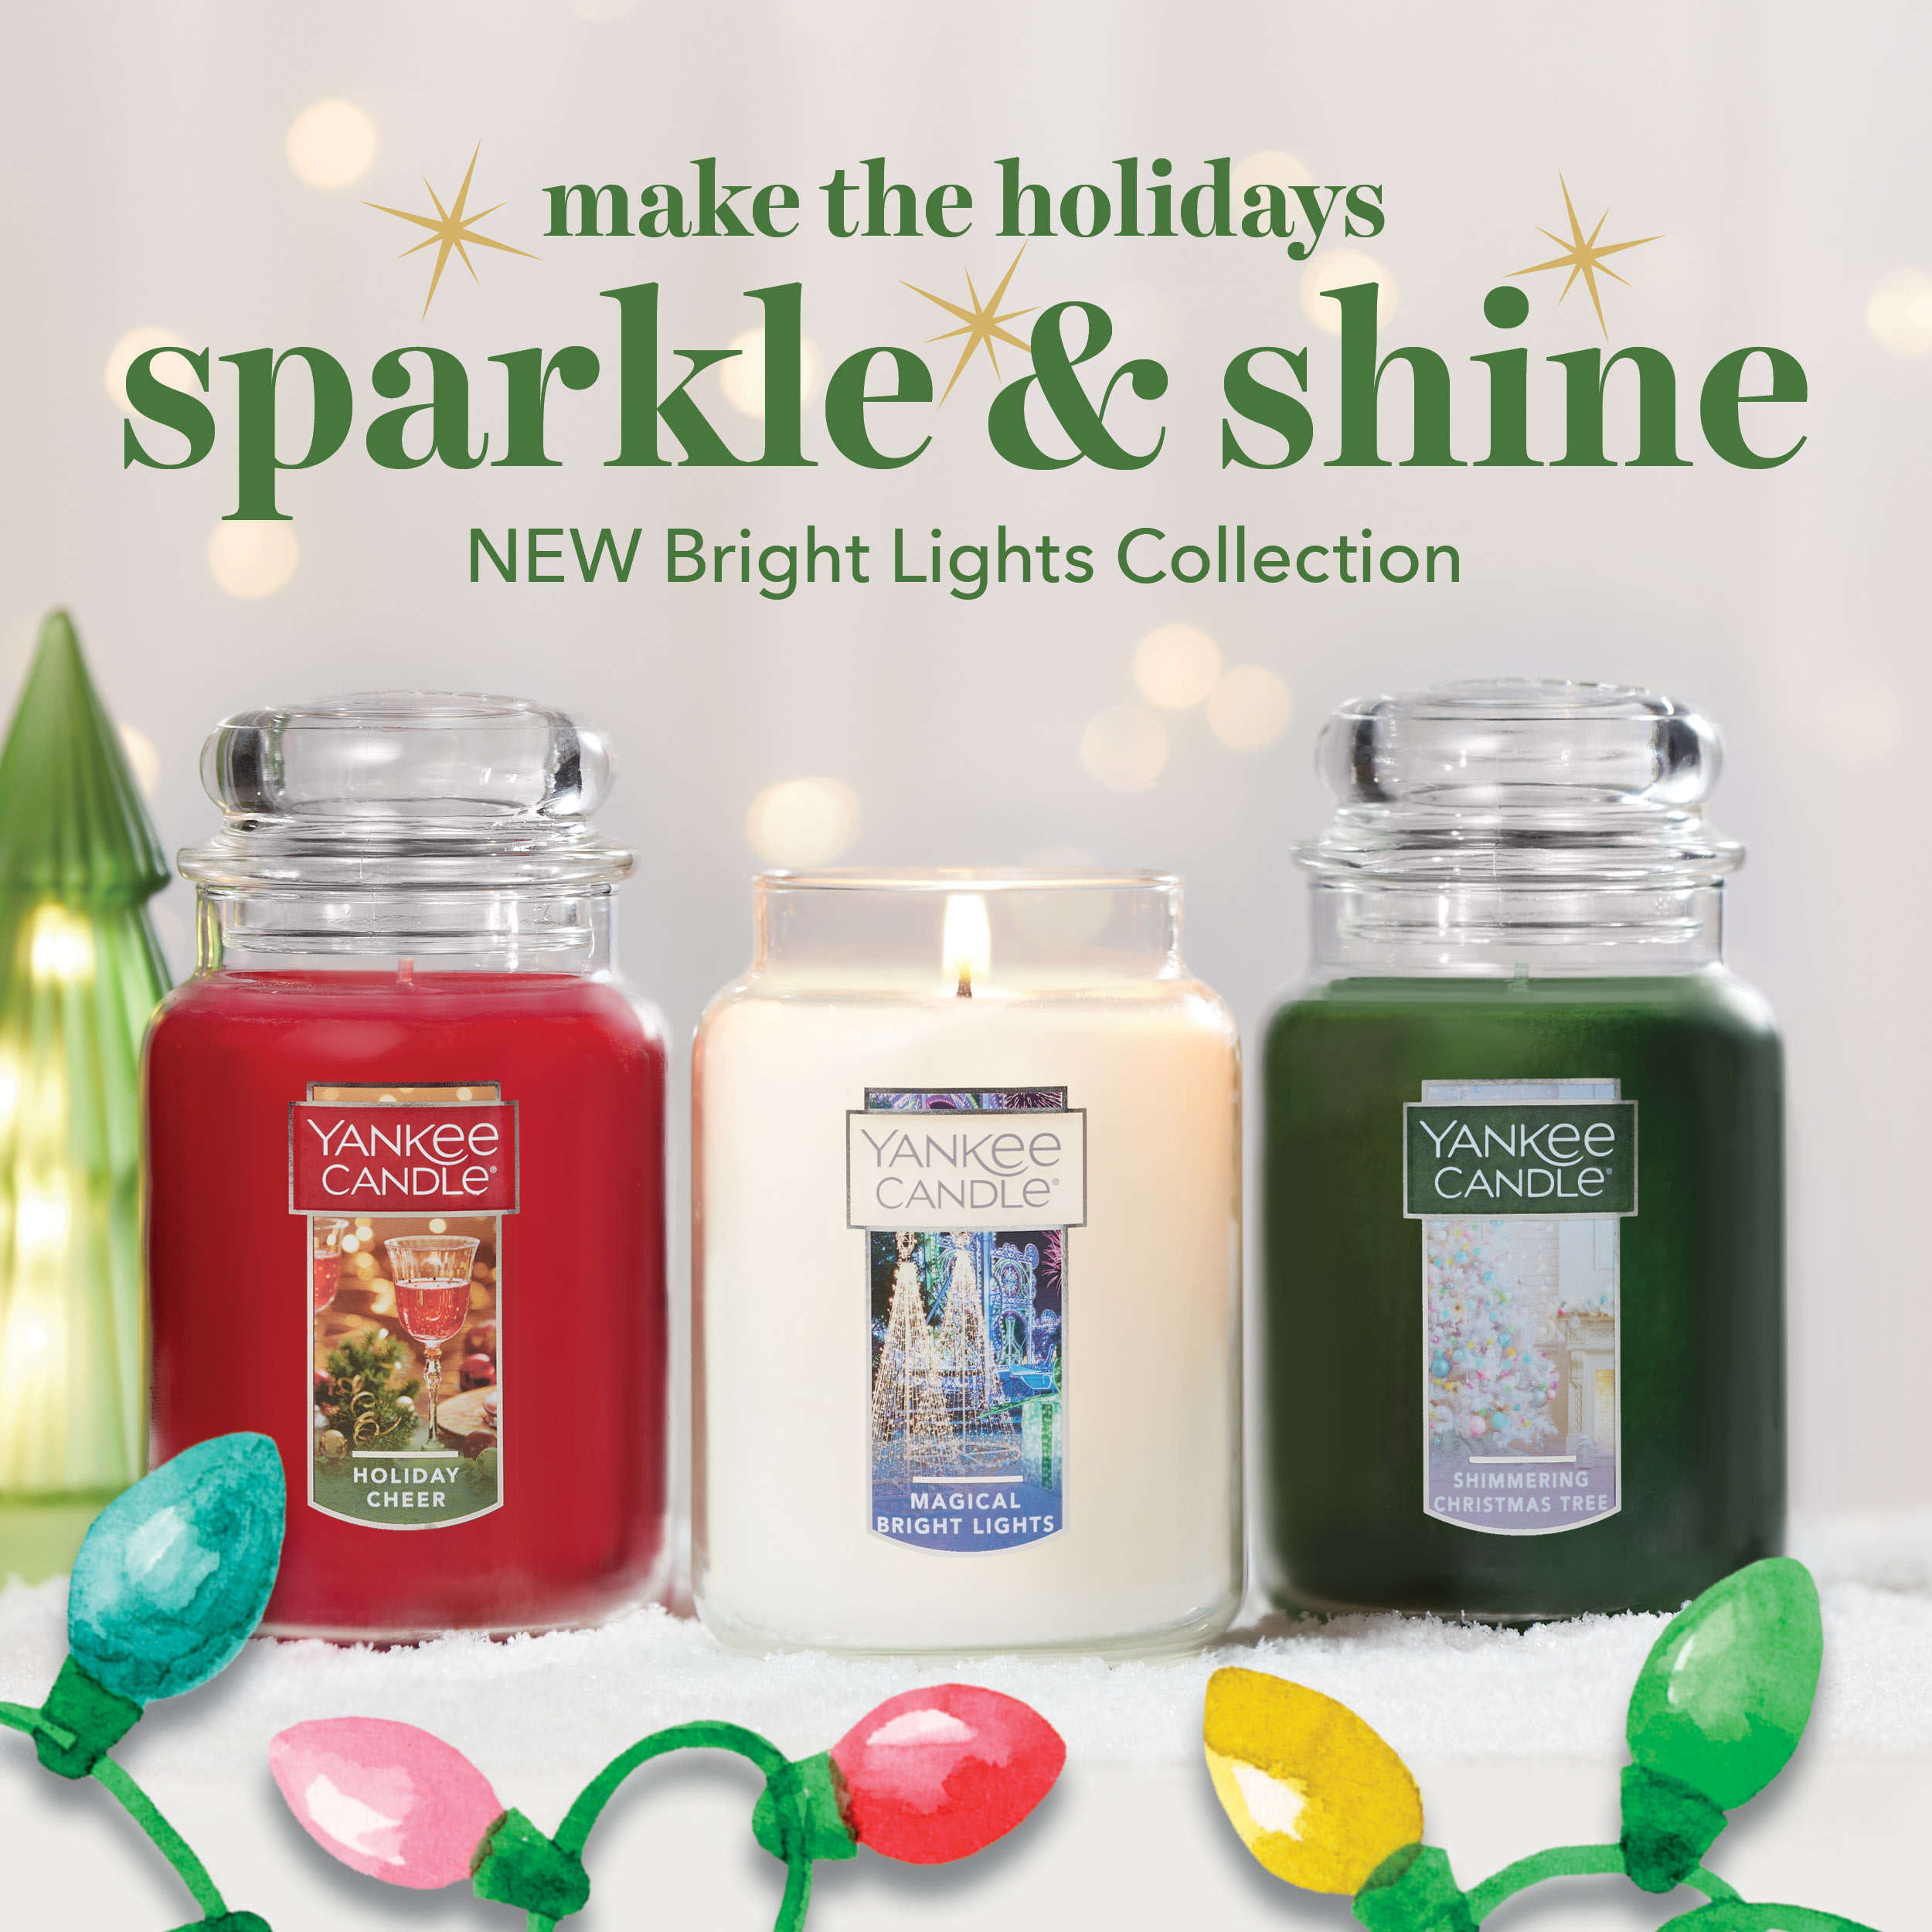 Introducing our NEW Bright Lights Collection from Yankee Candle